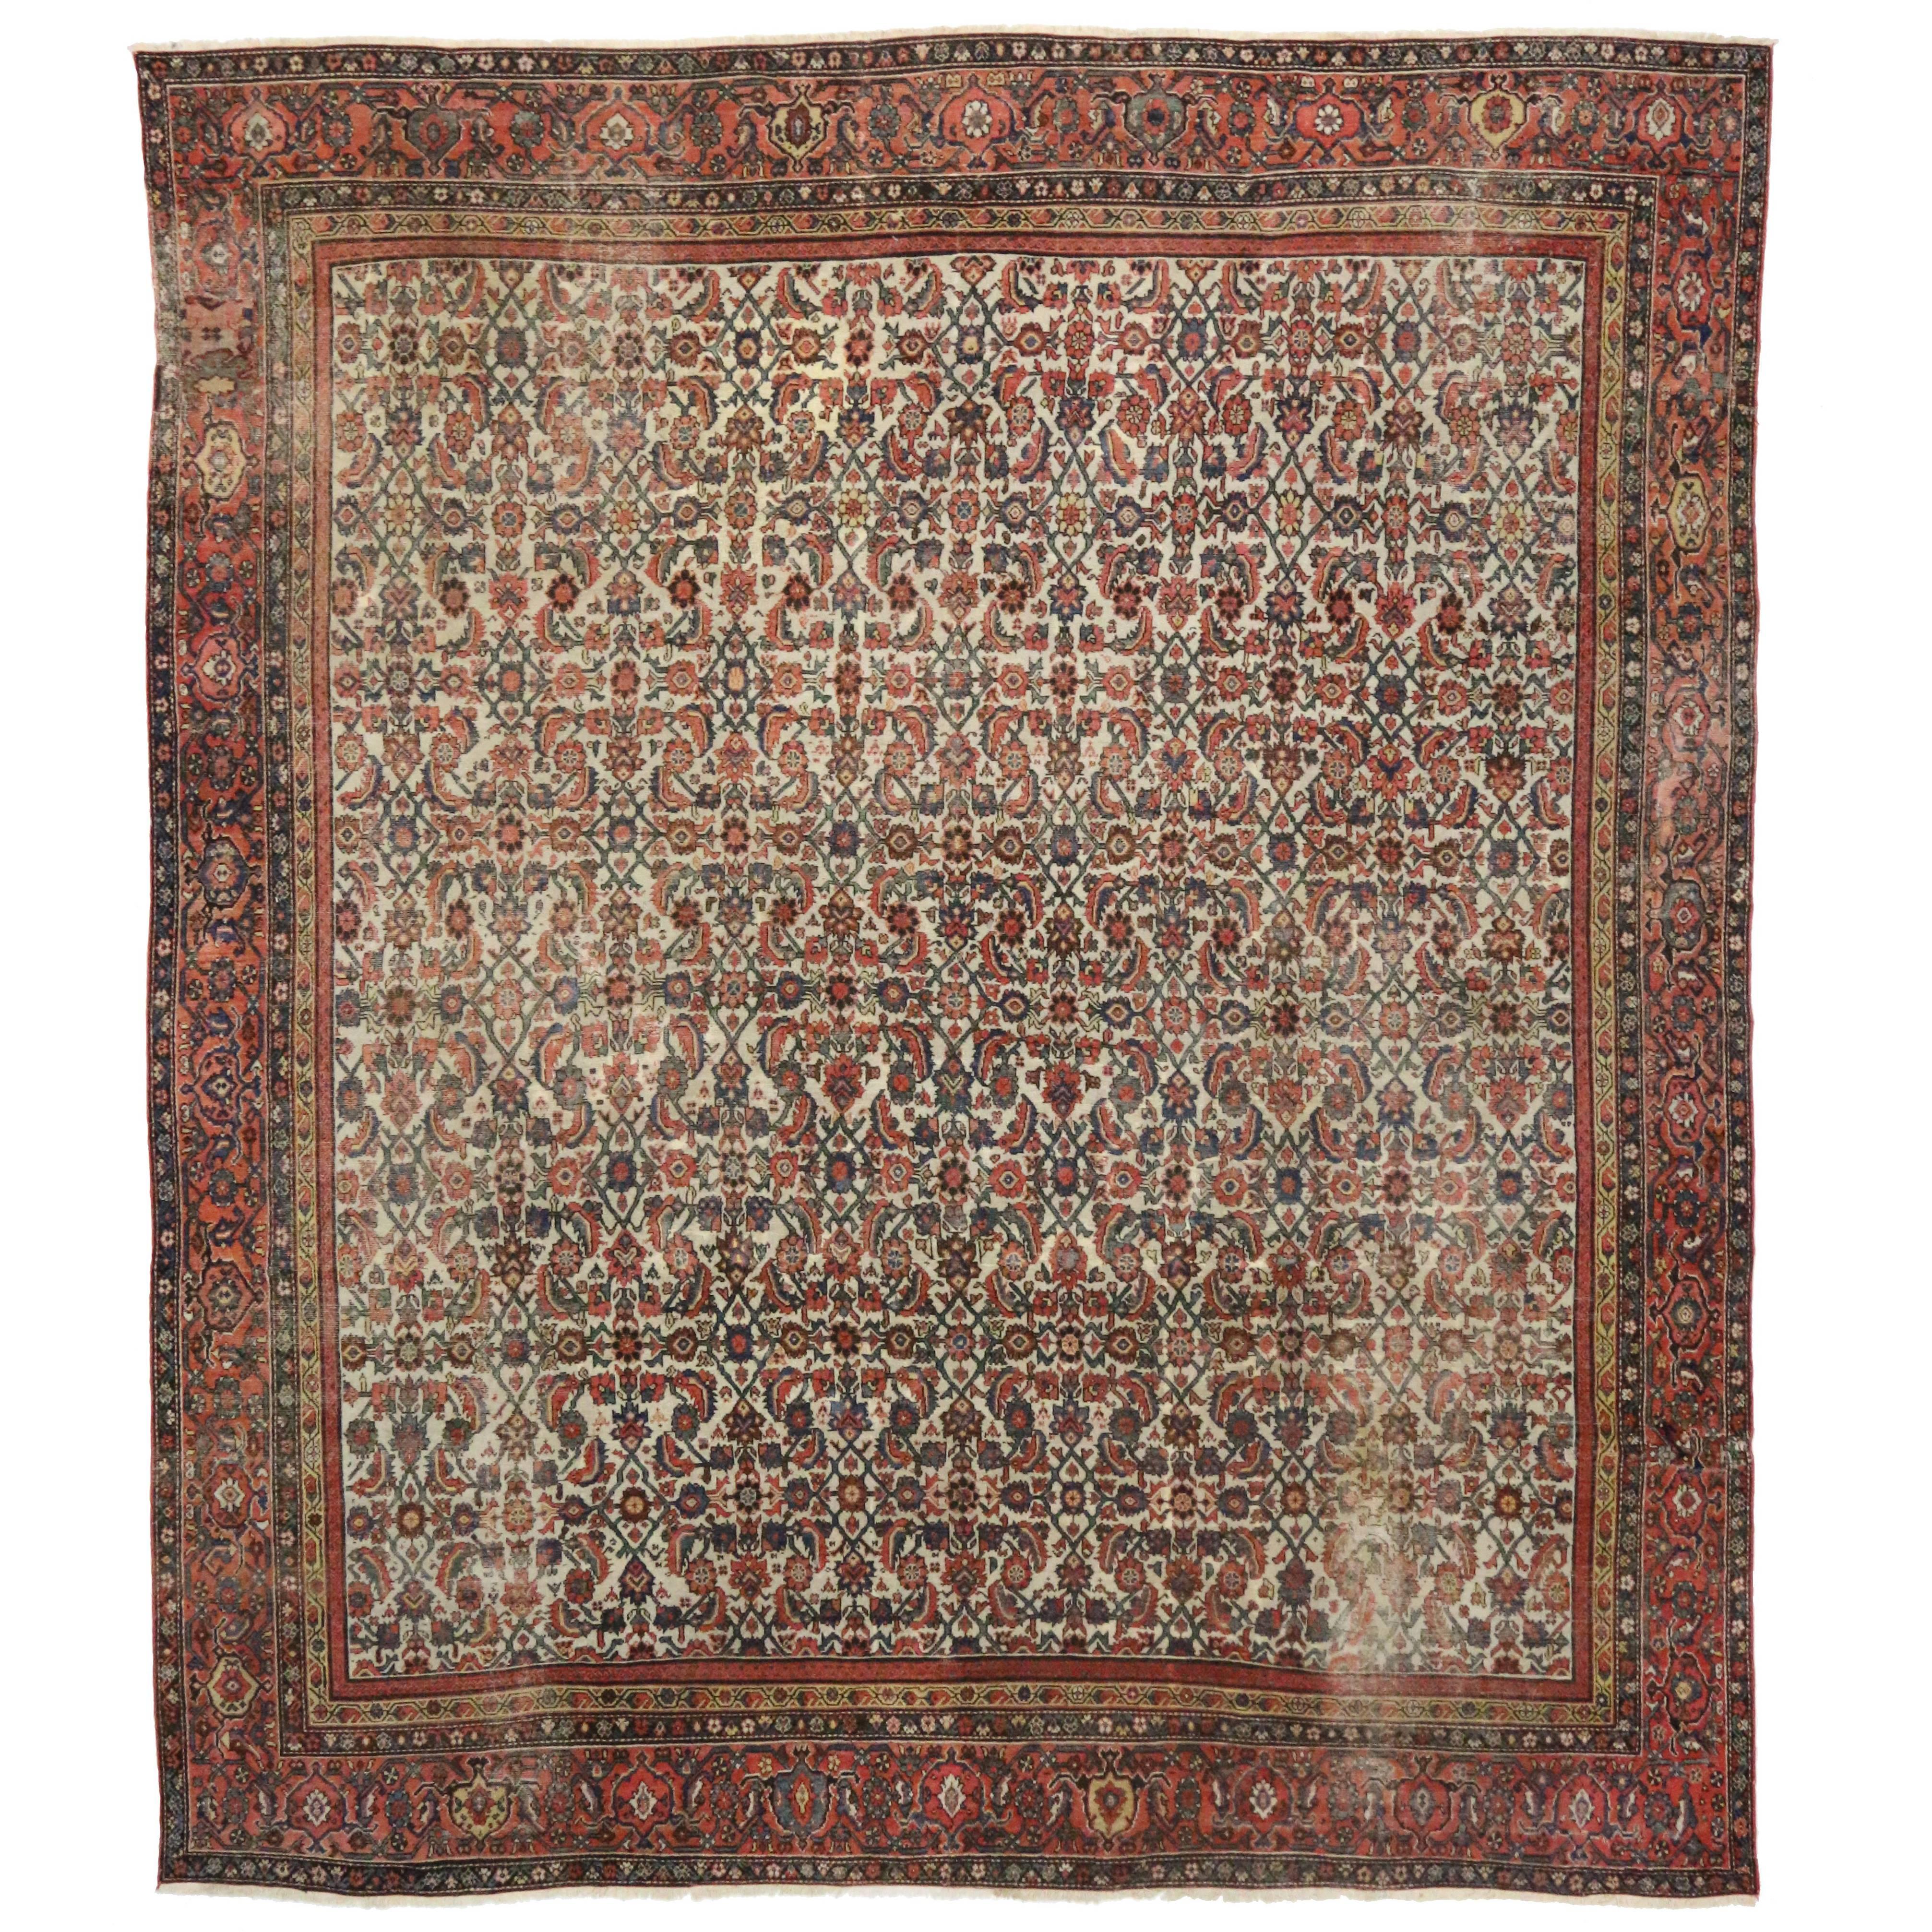 Late 19th Century Distressed Antique Persian Mahal Rug with Rustic English Style For Sale